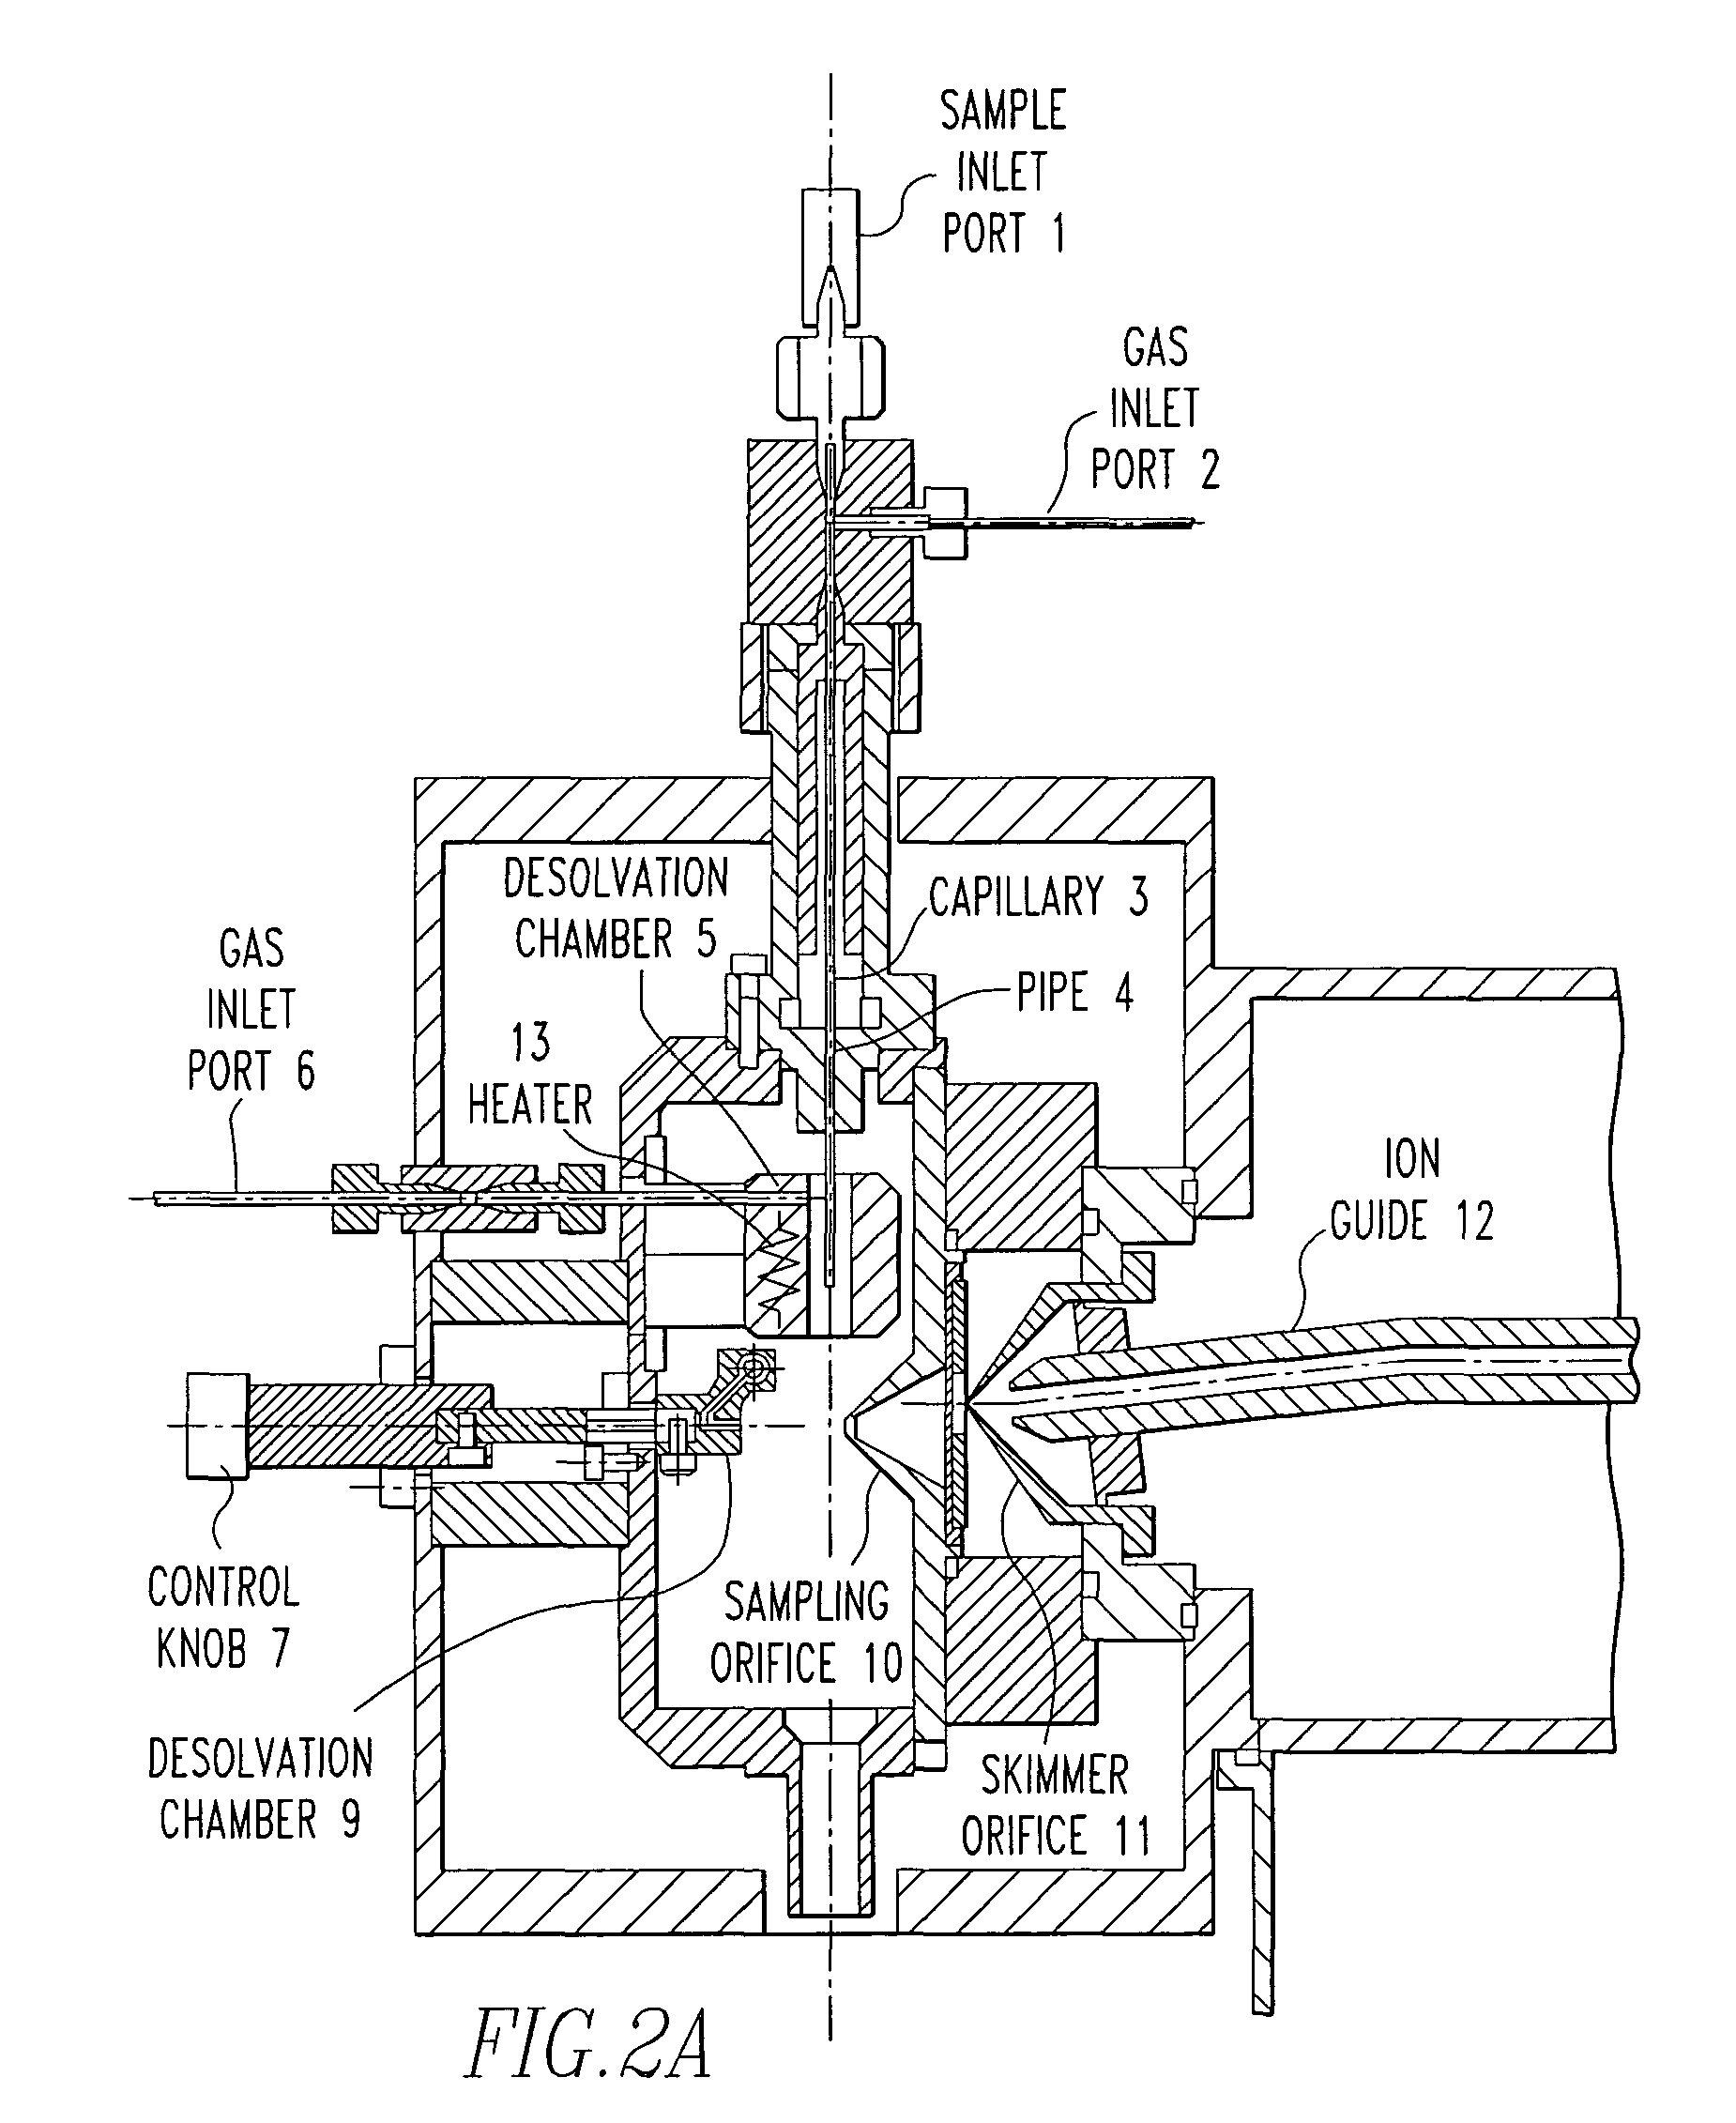 Electrospray mass spectrometer and ion source